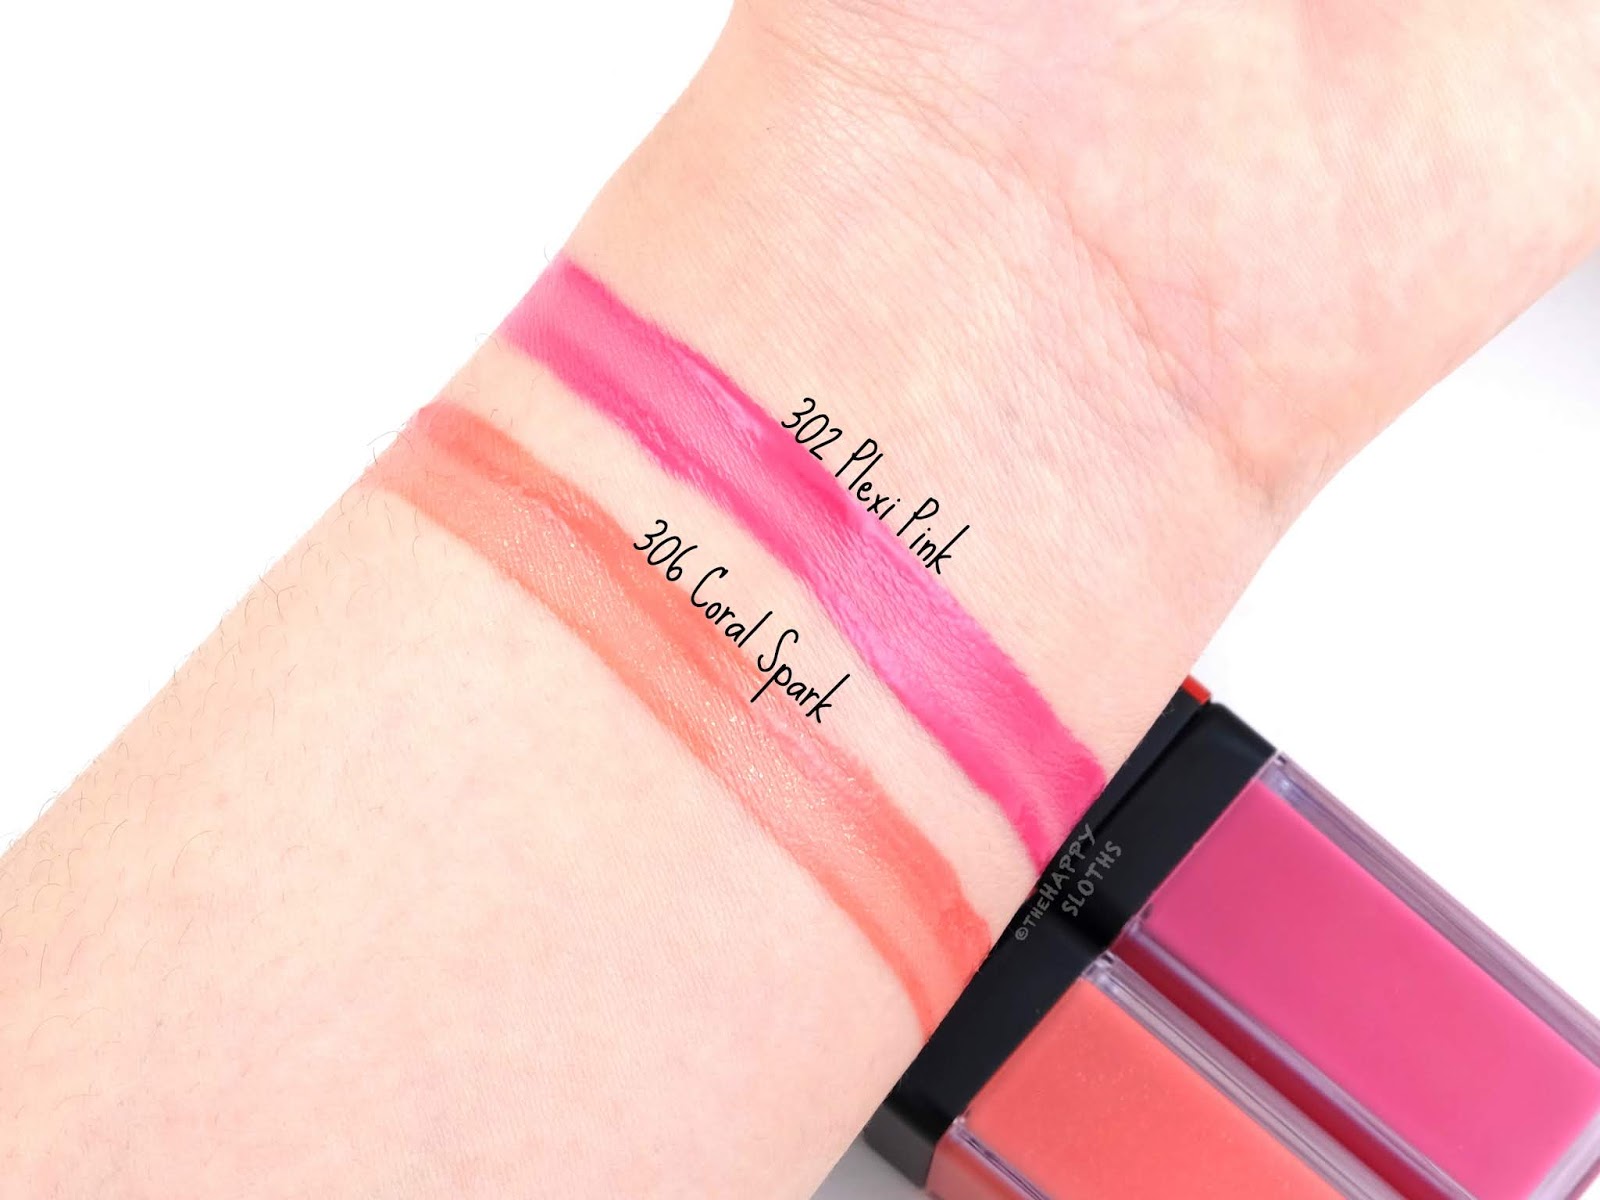 Shiseido | LacquerInk LipShine in "302 Plexi Pink" & "306 Coral Spark": Review and Swatches